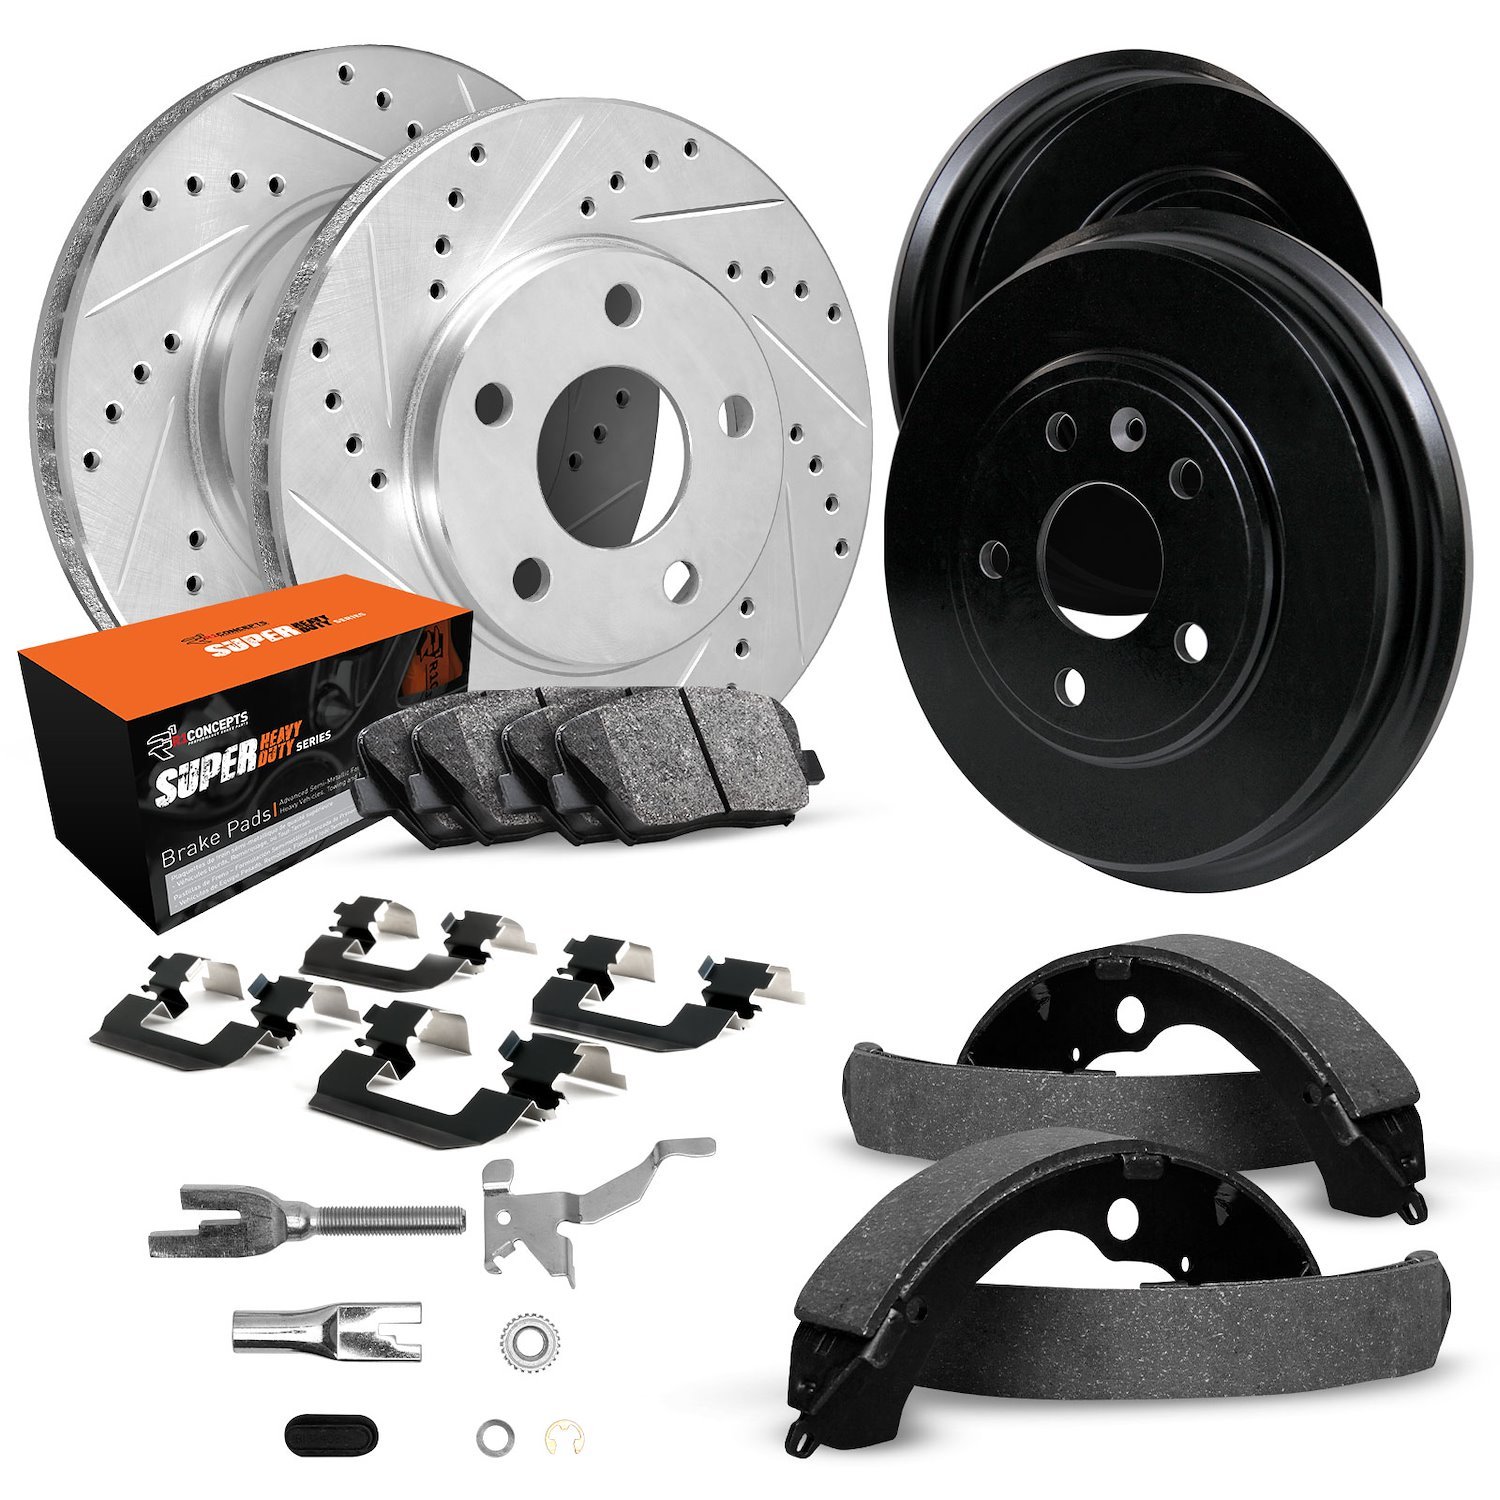 E-Line Drilled/Slotted Silver Rotor & Drum Set w/Super-Duty Pads, Shoes/Hardware/Adjusters, 1983-1989 Ford/Lincoln/Mercury/Mazda